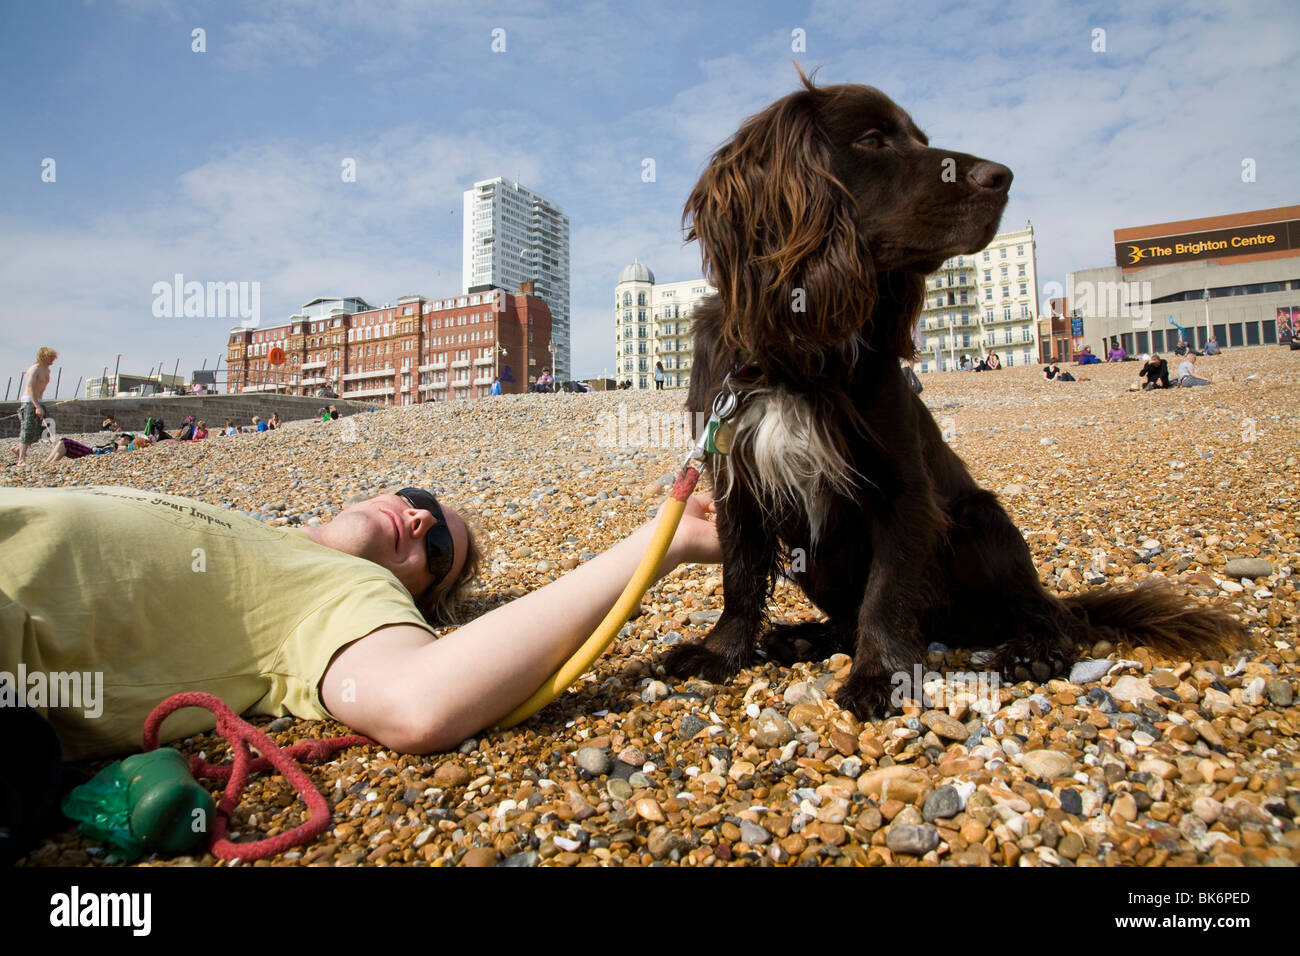 Man and dog on Brighton beach. The Brighton Centre, the Grand and the Metropole hotel can be seen in the background. Stock Photo